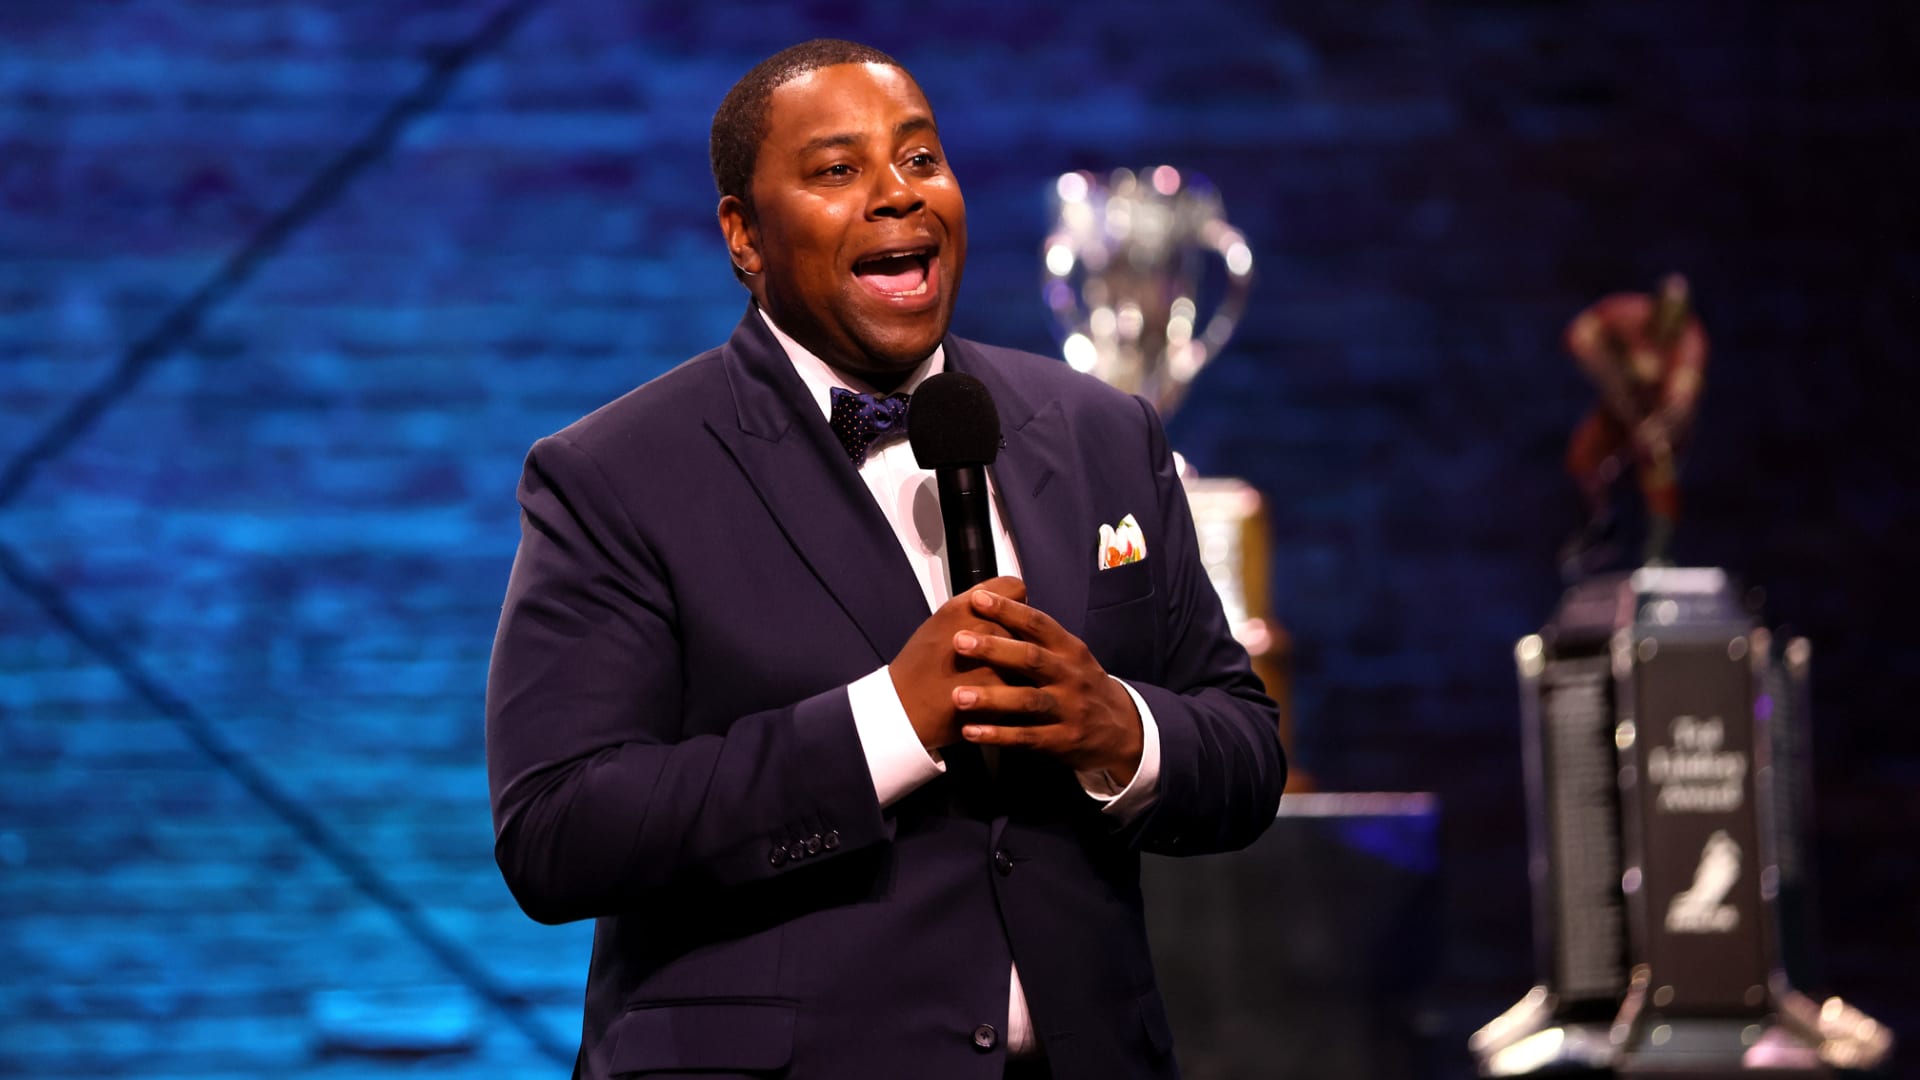 kenan-thompson-speaks-during-the-2022-nhl-awards-at-armature-wor